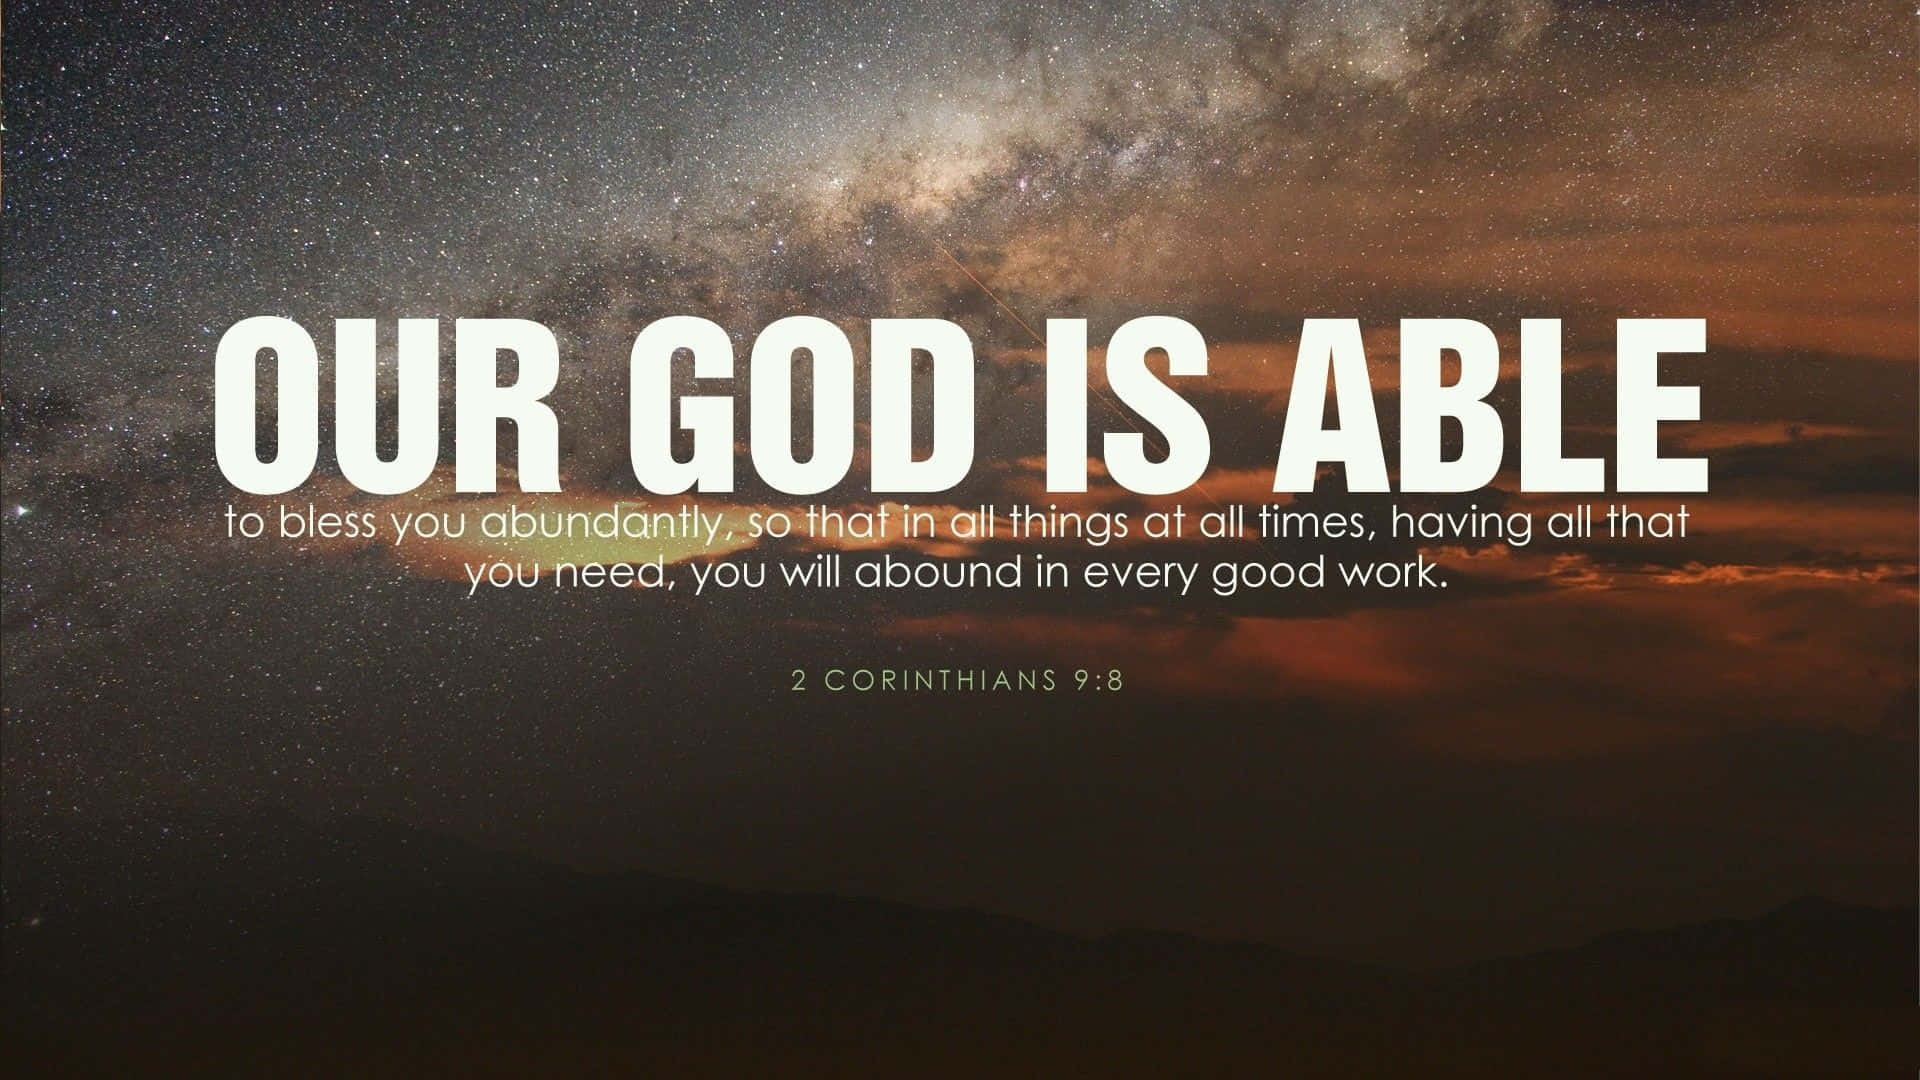 Our God Is Able - A Quote From The Bible